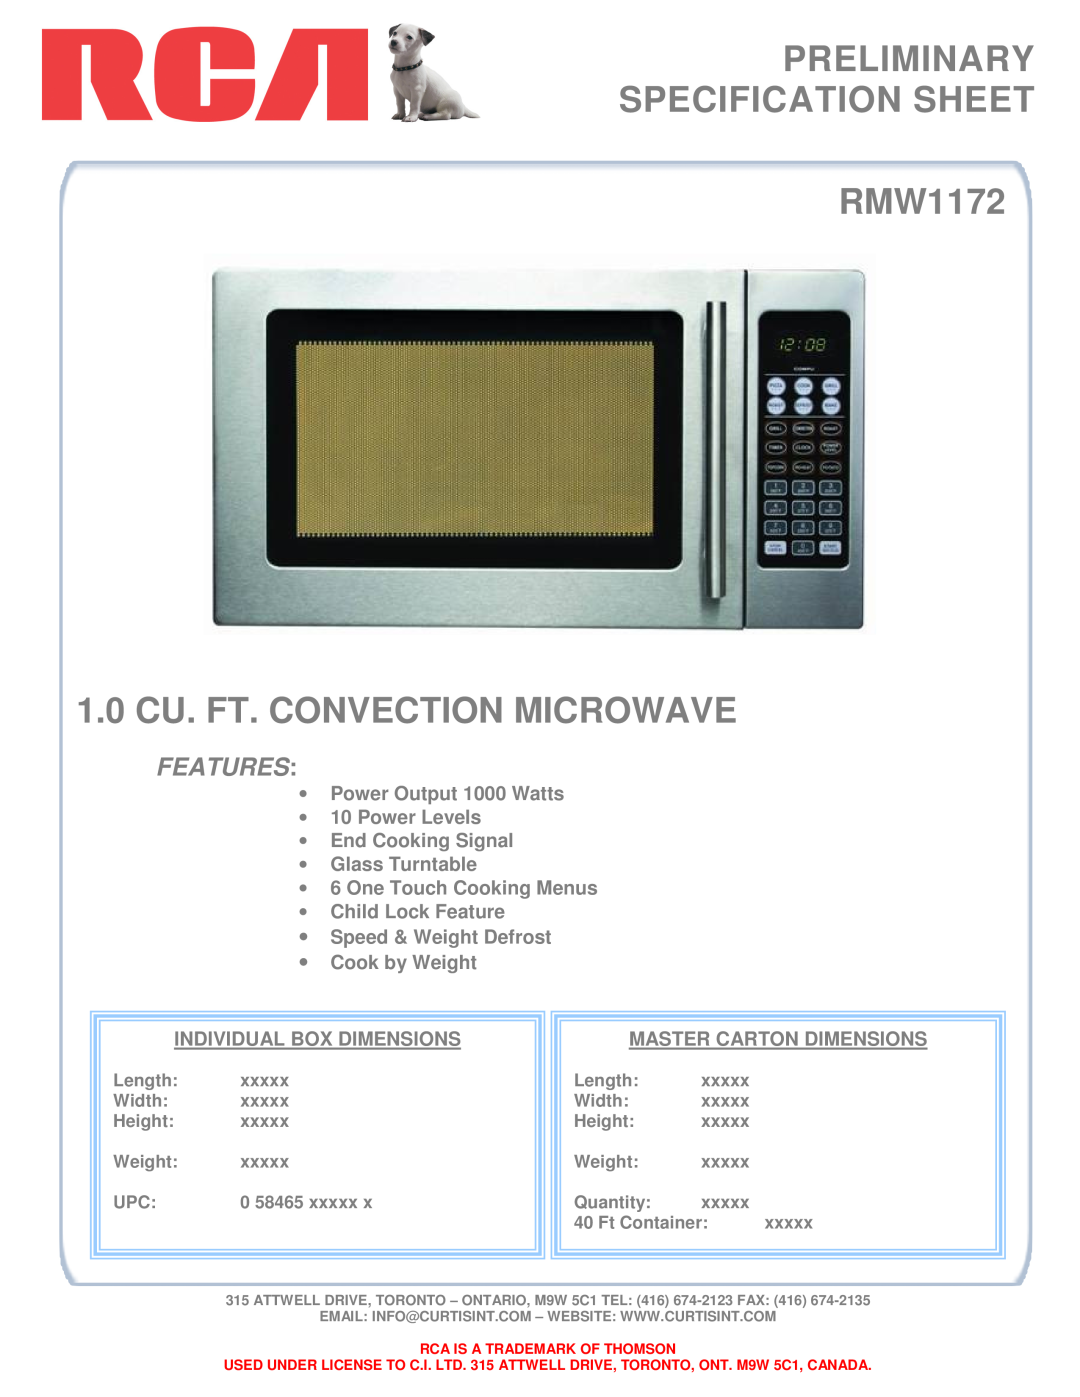 Curtis specifications PRELIMINARY SPECIFICATION SHEET RMW1172, 1.0 CU. FT. CONVECTION MICROWAVE, Features 